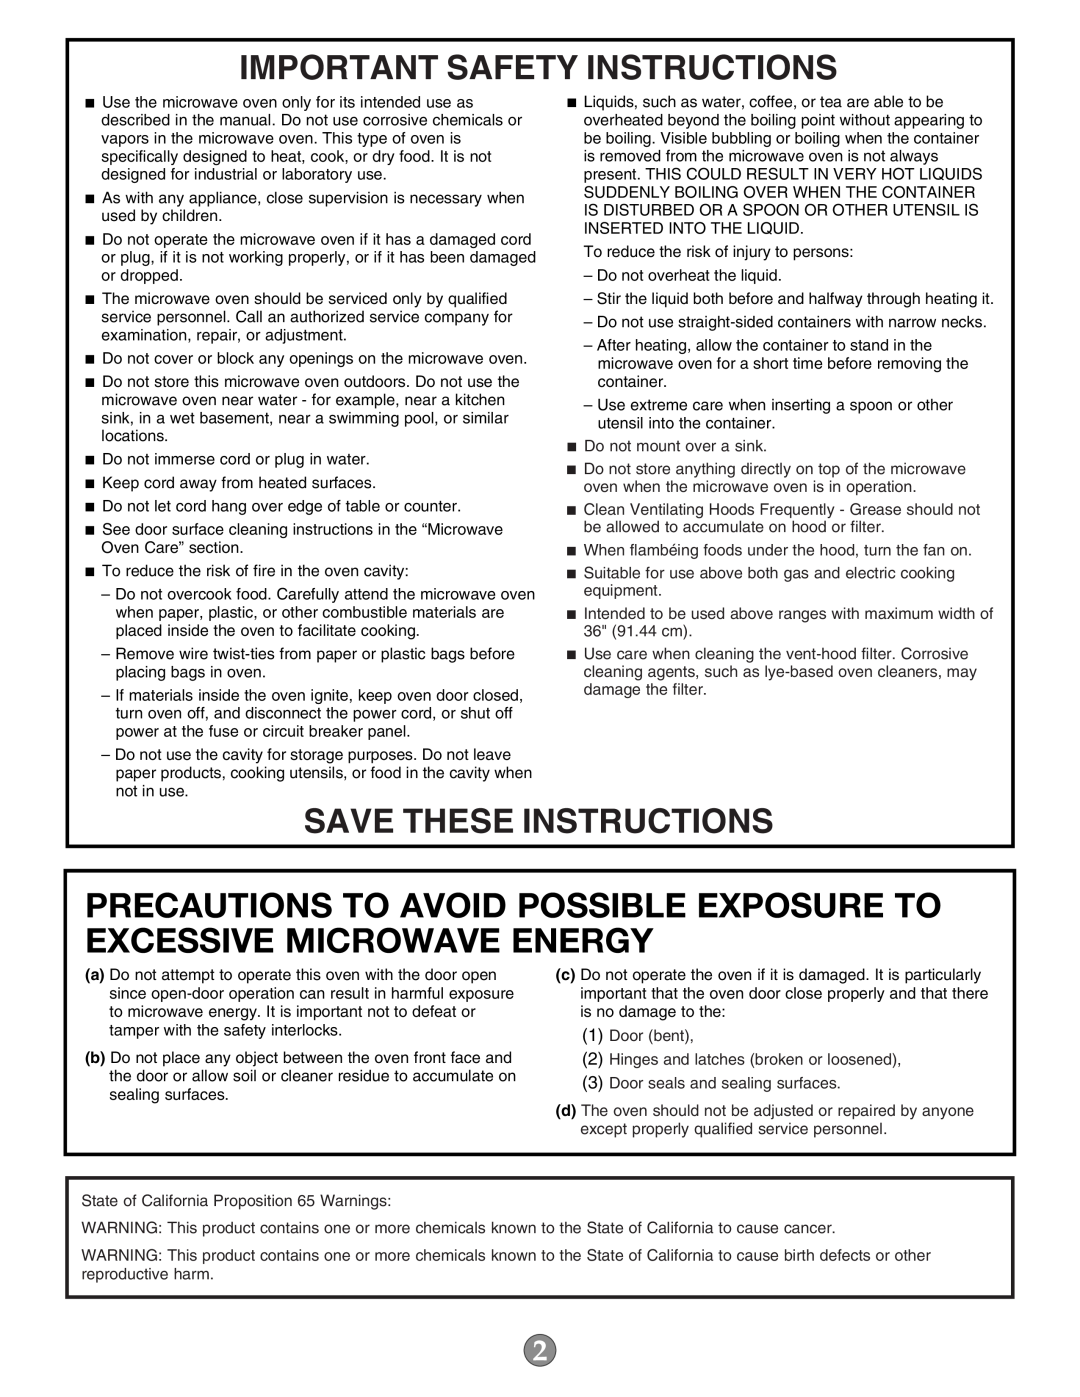 KitchenAid W10644749A Precautions To Avoid Possible Exposure To Excessive Microwave Energy, Important Safety Instructions 